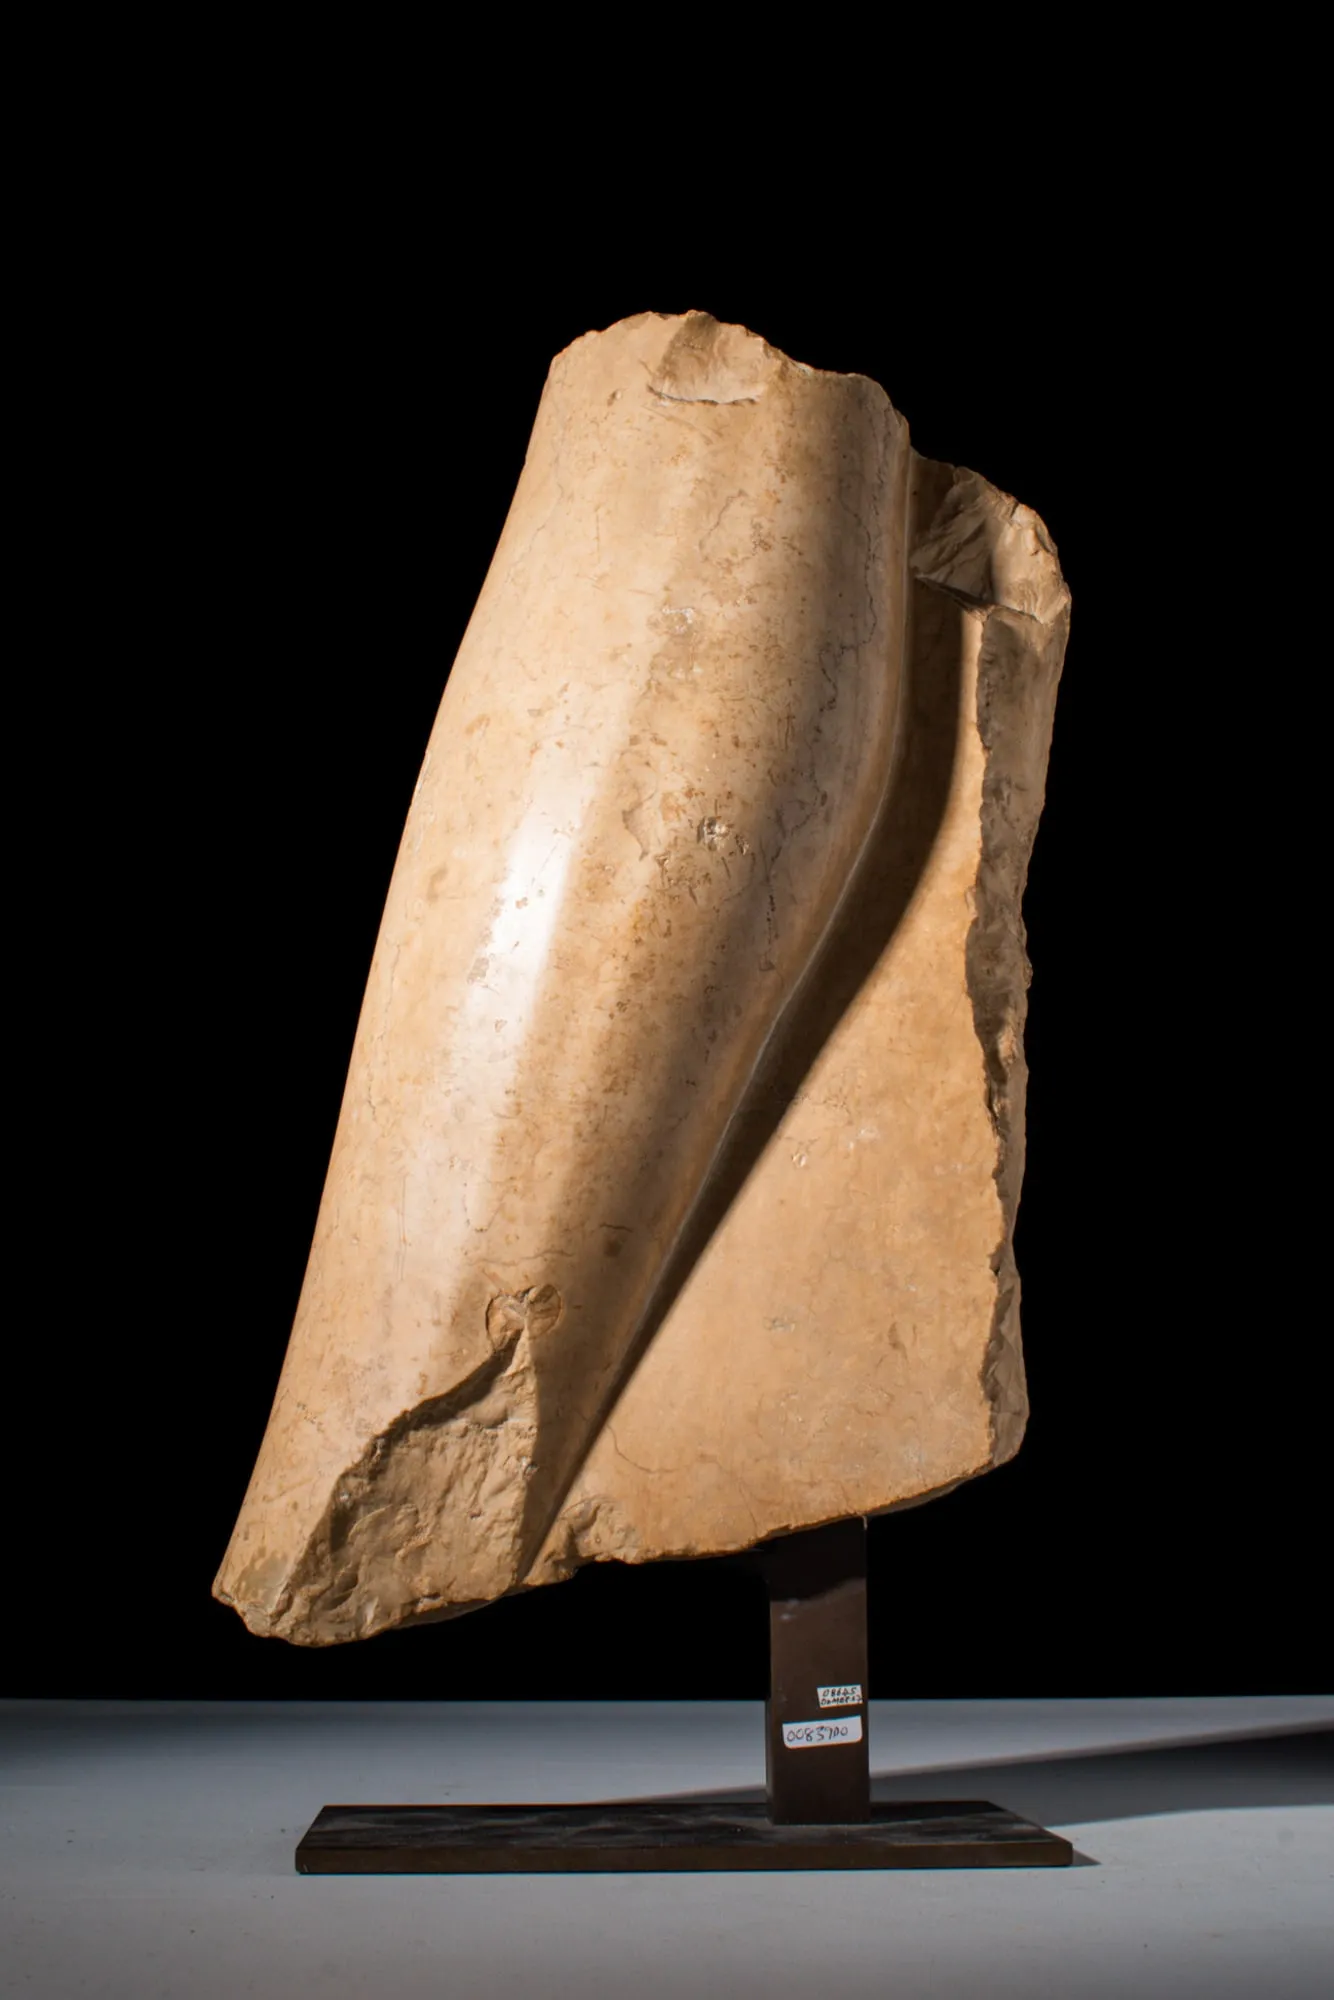 Middle Kingdom, 12th Dynasty (circa 1859-1813 BC) calcite lower leg fragment, which sold for £18,000 (£22,500 or $28,540 with buyer’s premium) at Apollo Art Auctions.